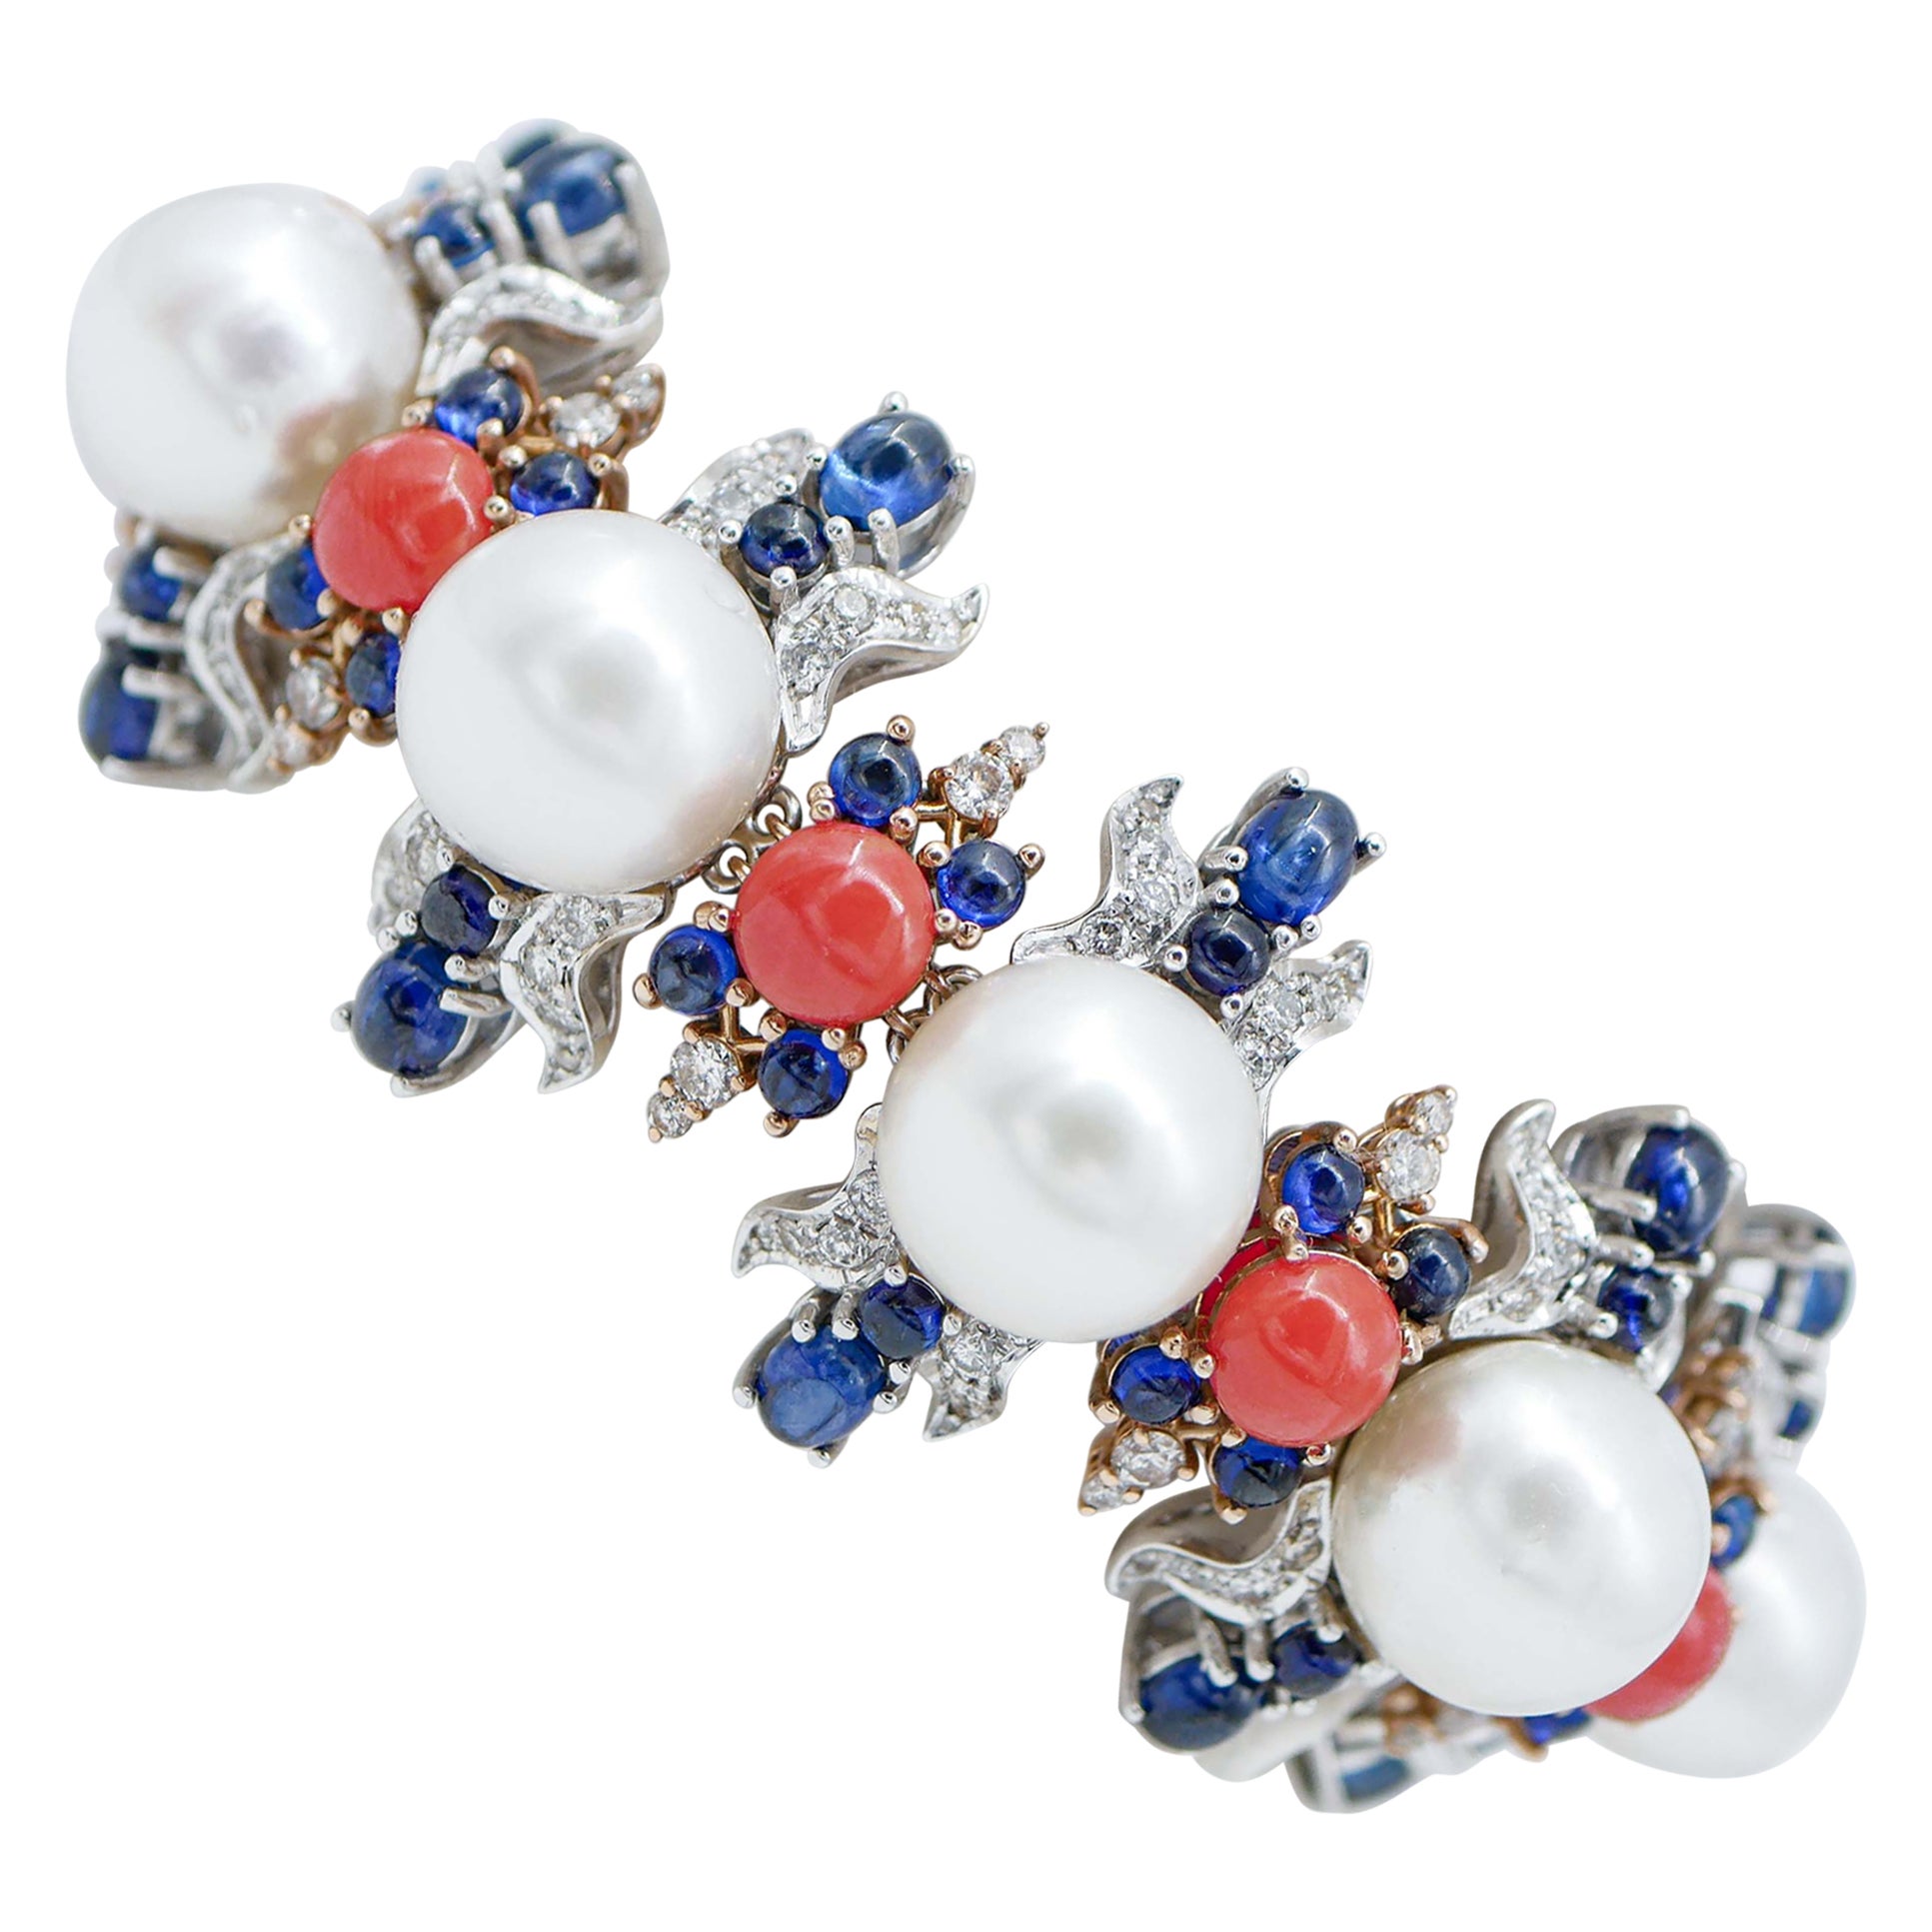 South-Sea Pearls, Coral, Sapphires, Diamonds, 14 Karat White and Rose Gold Bracelet.